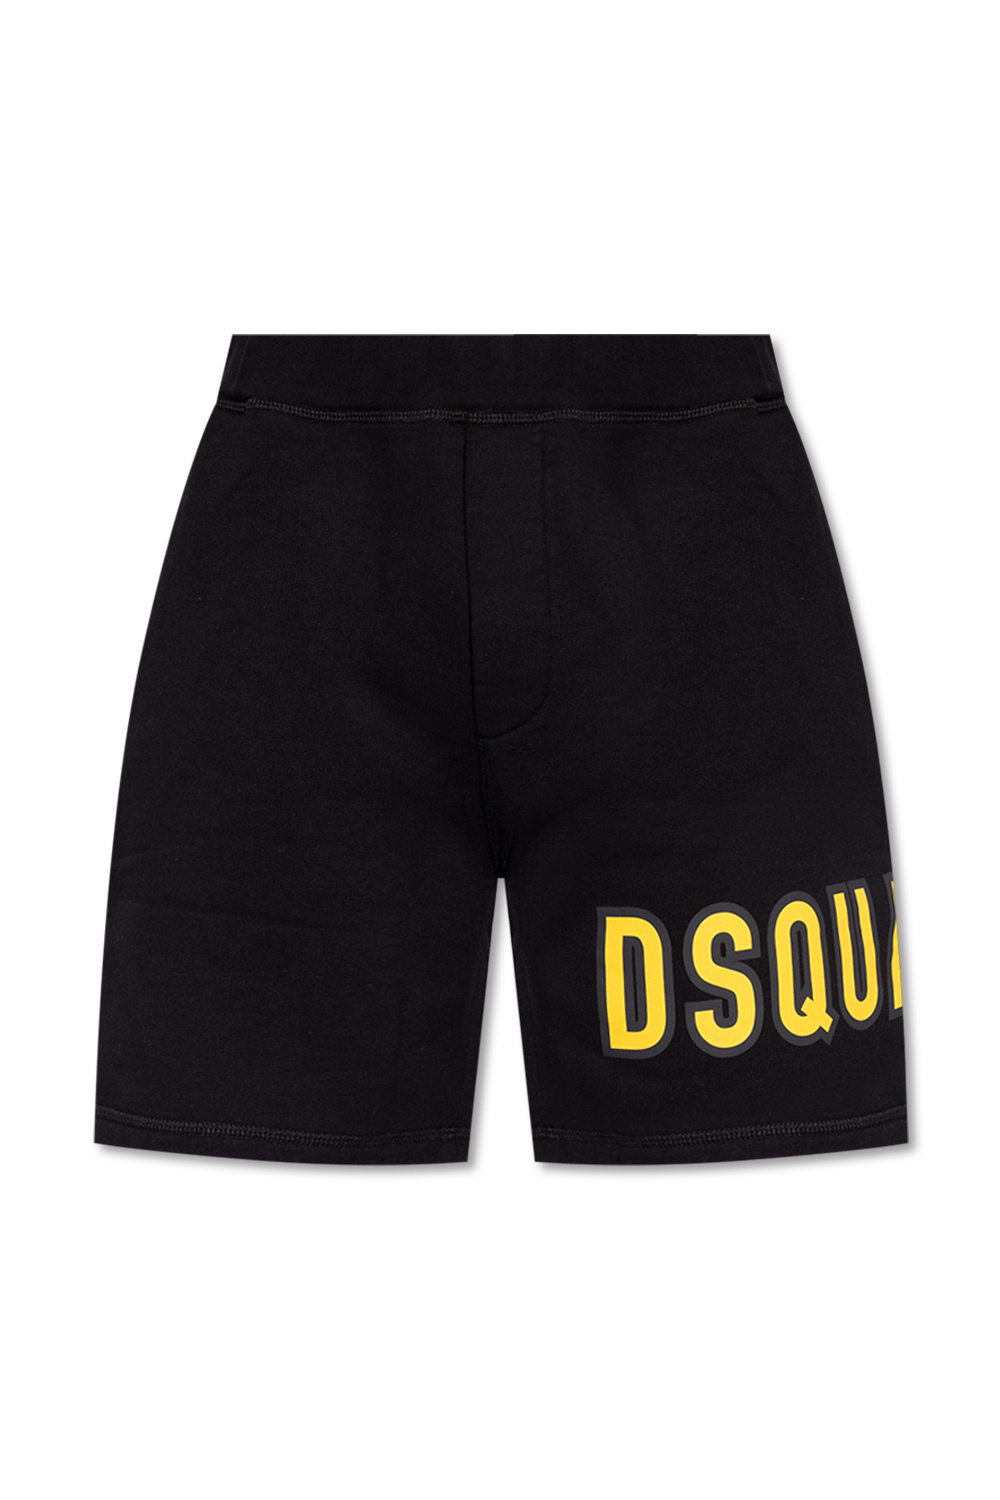 Dsquared2 Shorts with logo | Men's Clothing | IetpShops